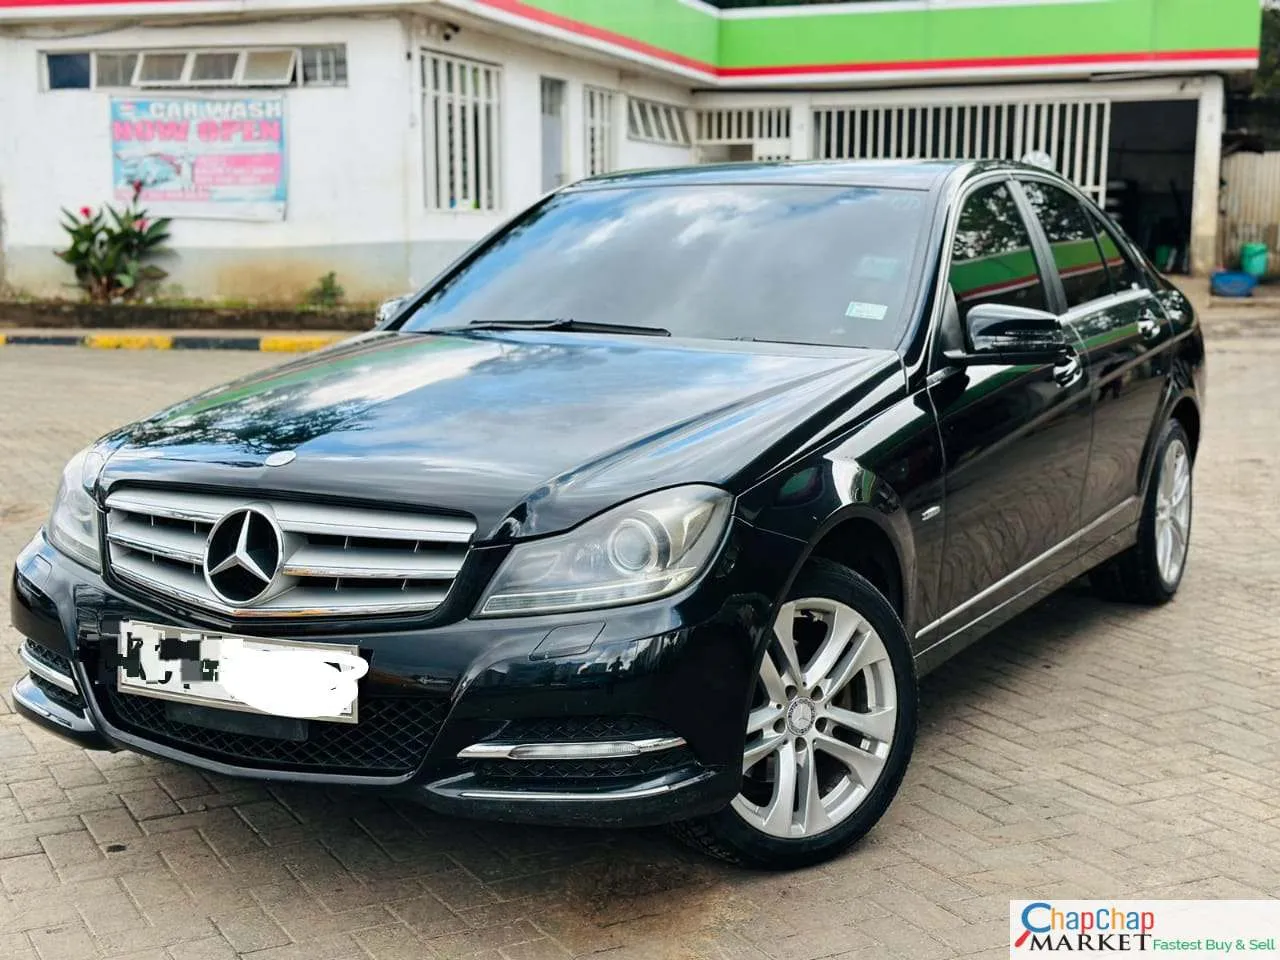 Mercedes Benz C200 🔥 QUICK SALE You Pay 30% DEPOSIT Trade in OK EXCLUSIVE HIRE PURCHASE INSTALLMENTS